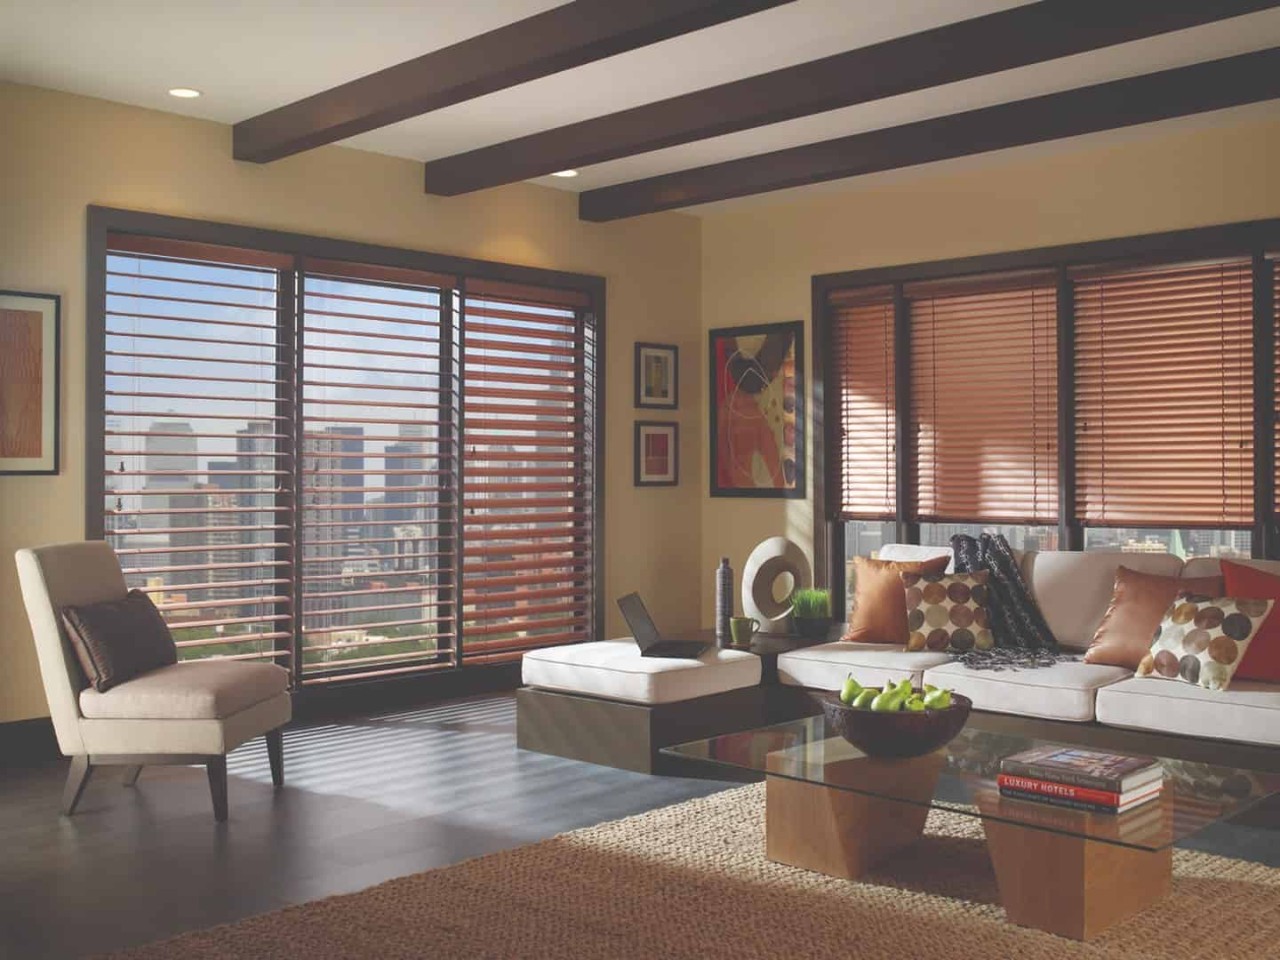 7 considerations for updating your bedroom, featuring Hunter Douglas window coverings, near Scottsdale, Arizona (AZ)